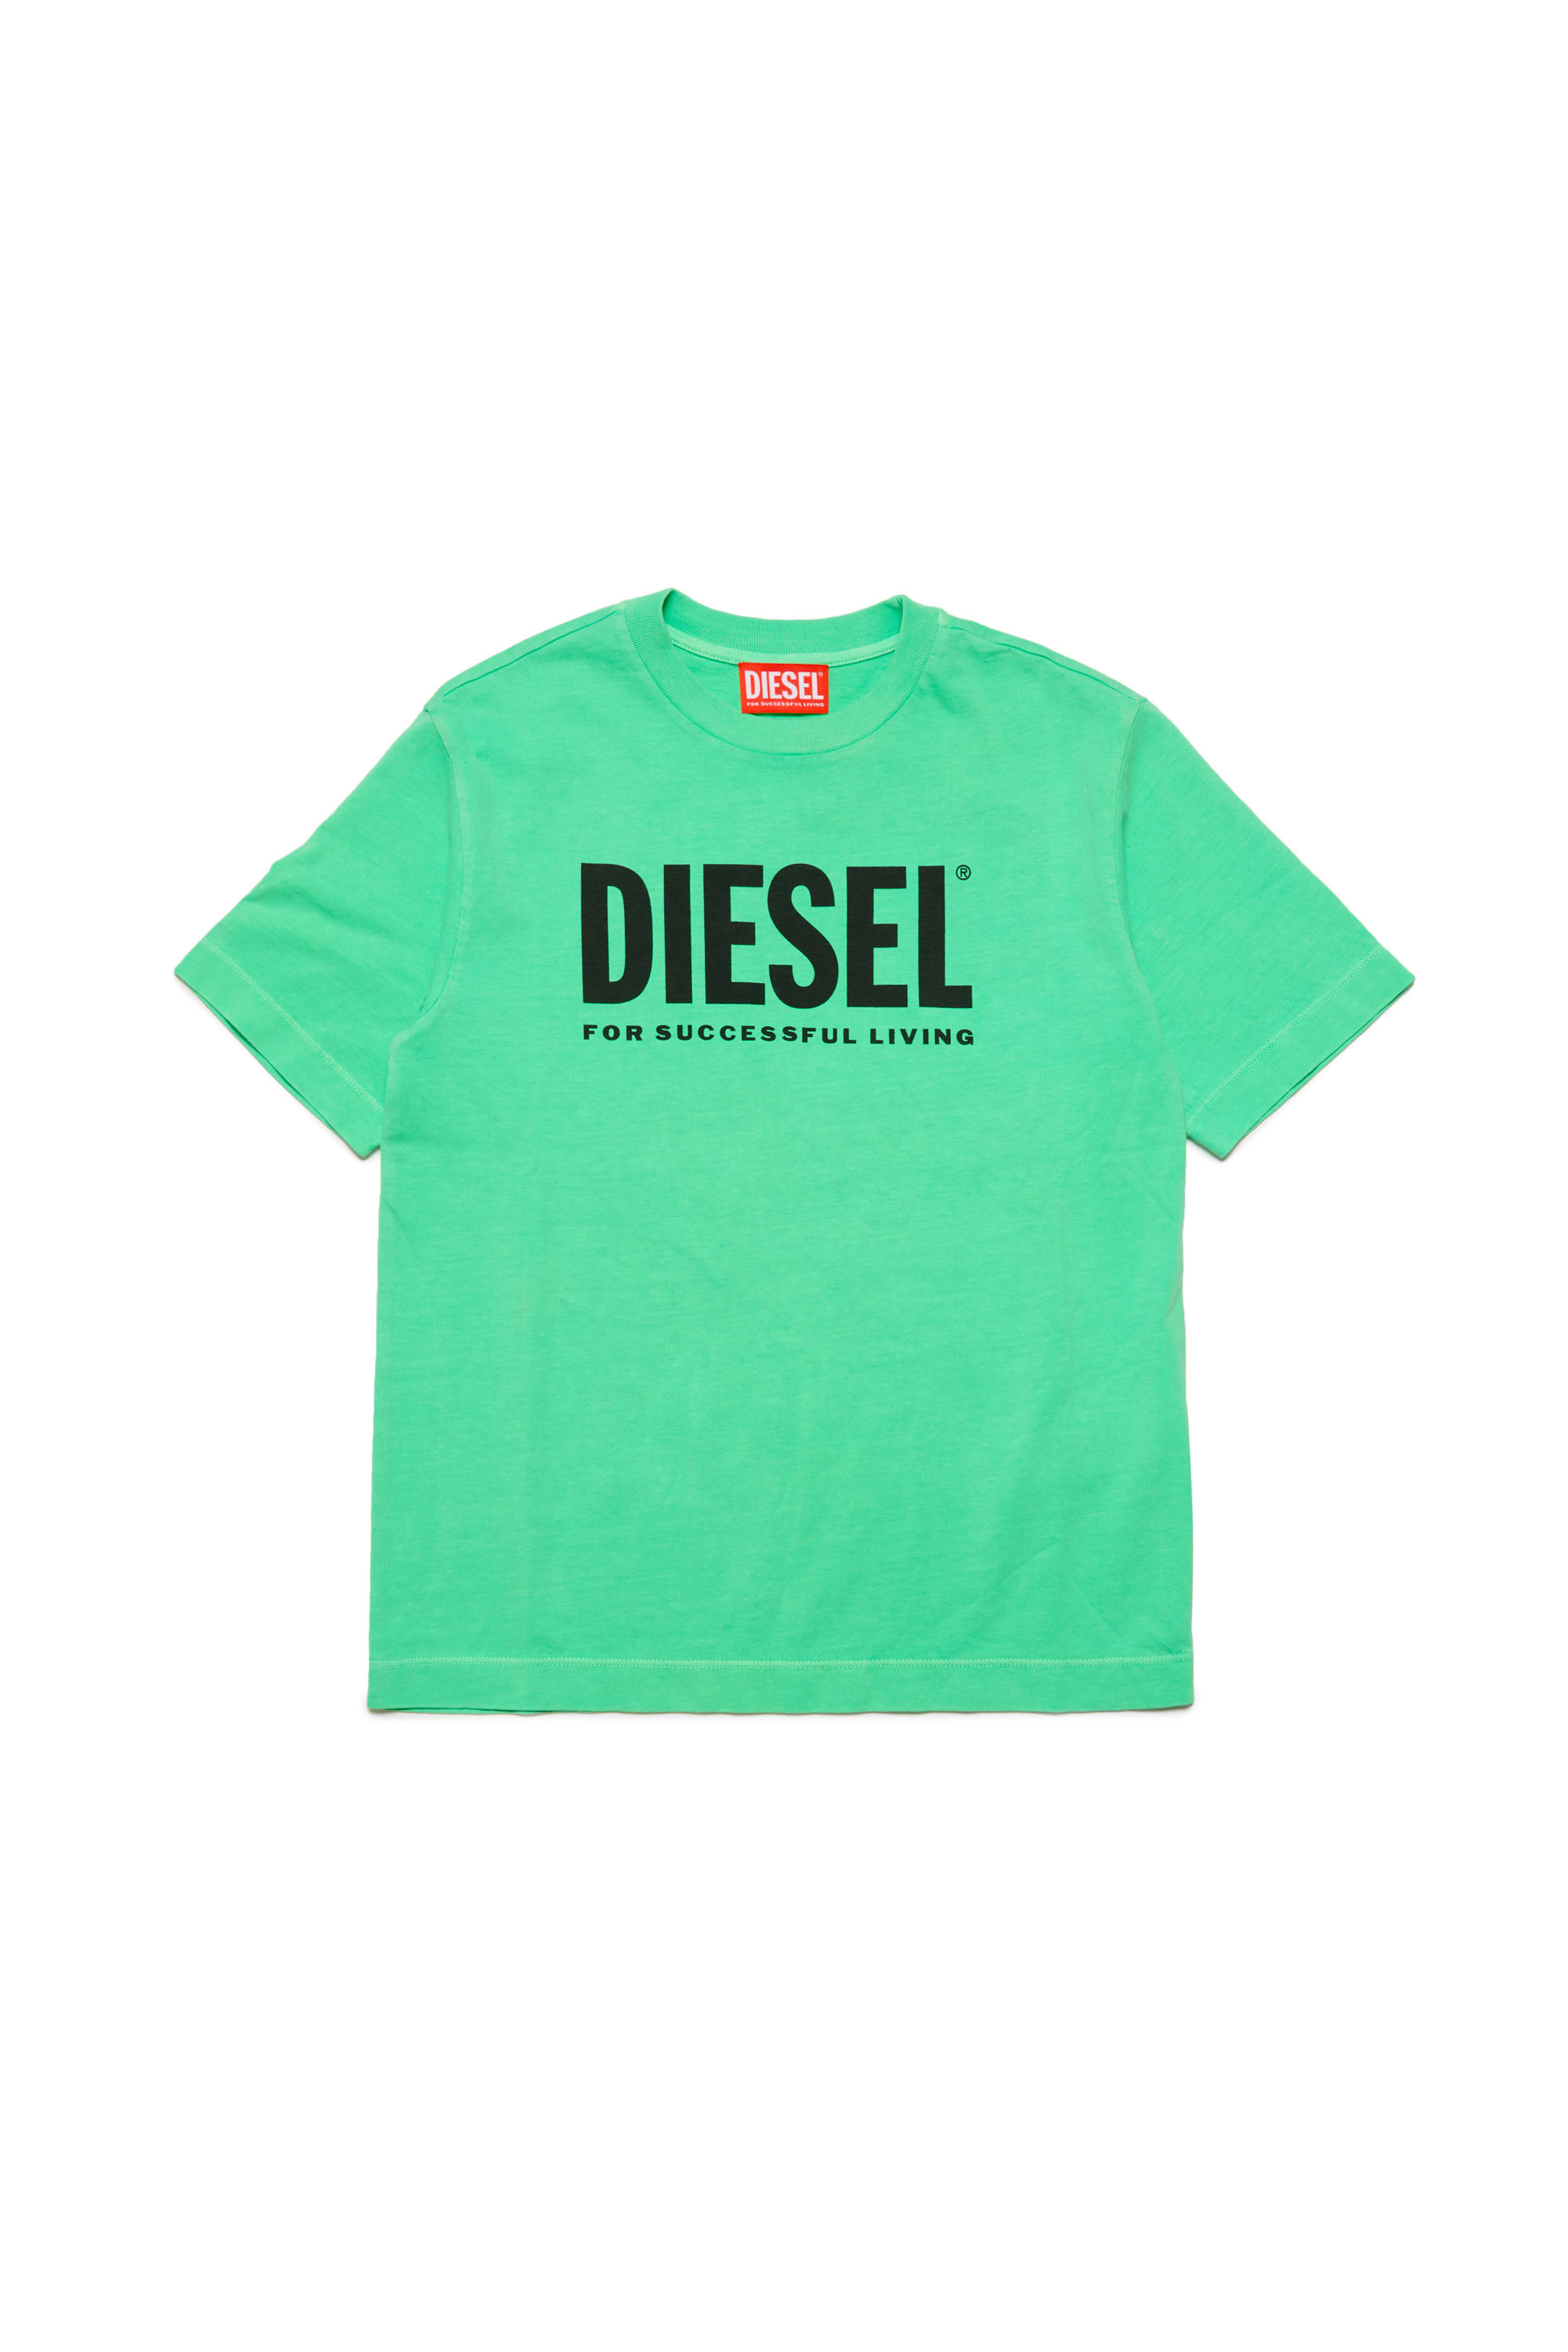 Diesel - TNUCI OVER, Unisex T-shirt with Diesel For Successful Living logo in Green - Image 1